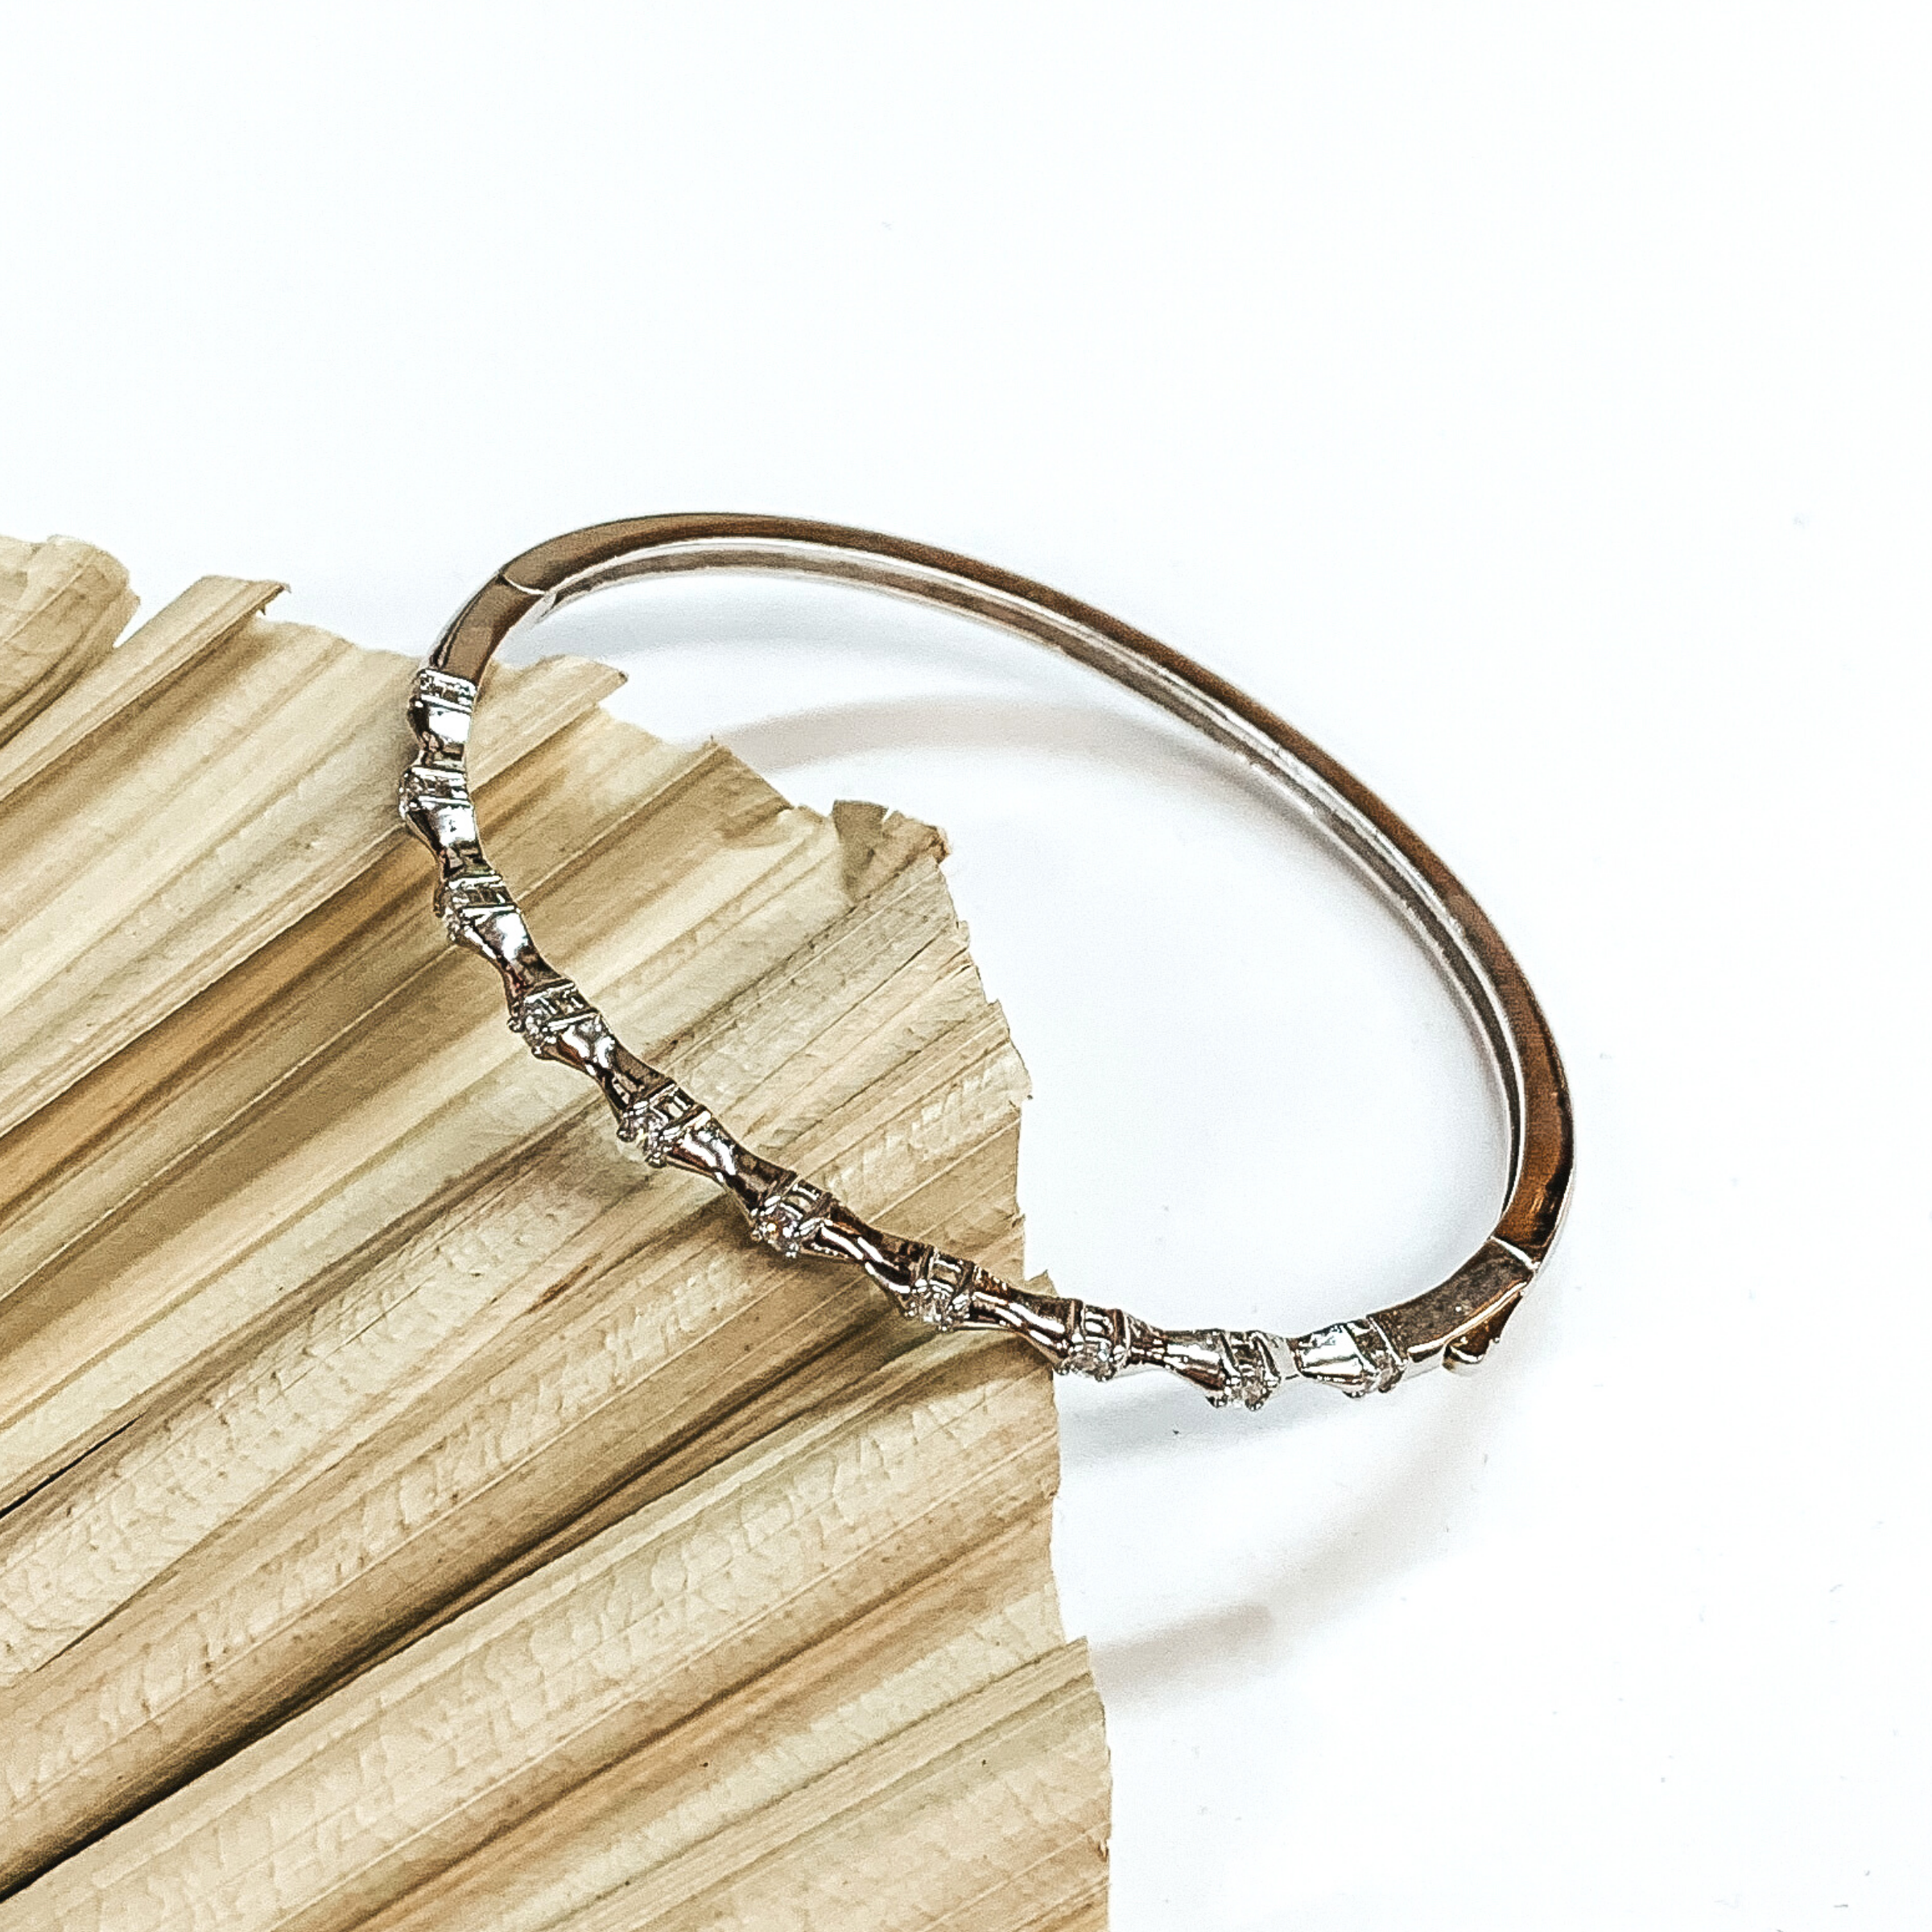 This is a thin silver bangle bracelet with clear crystal spacers. This bracelet is pictured laying on a green palm leaf on a white background.